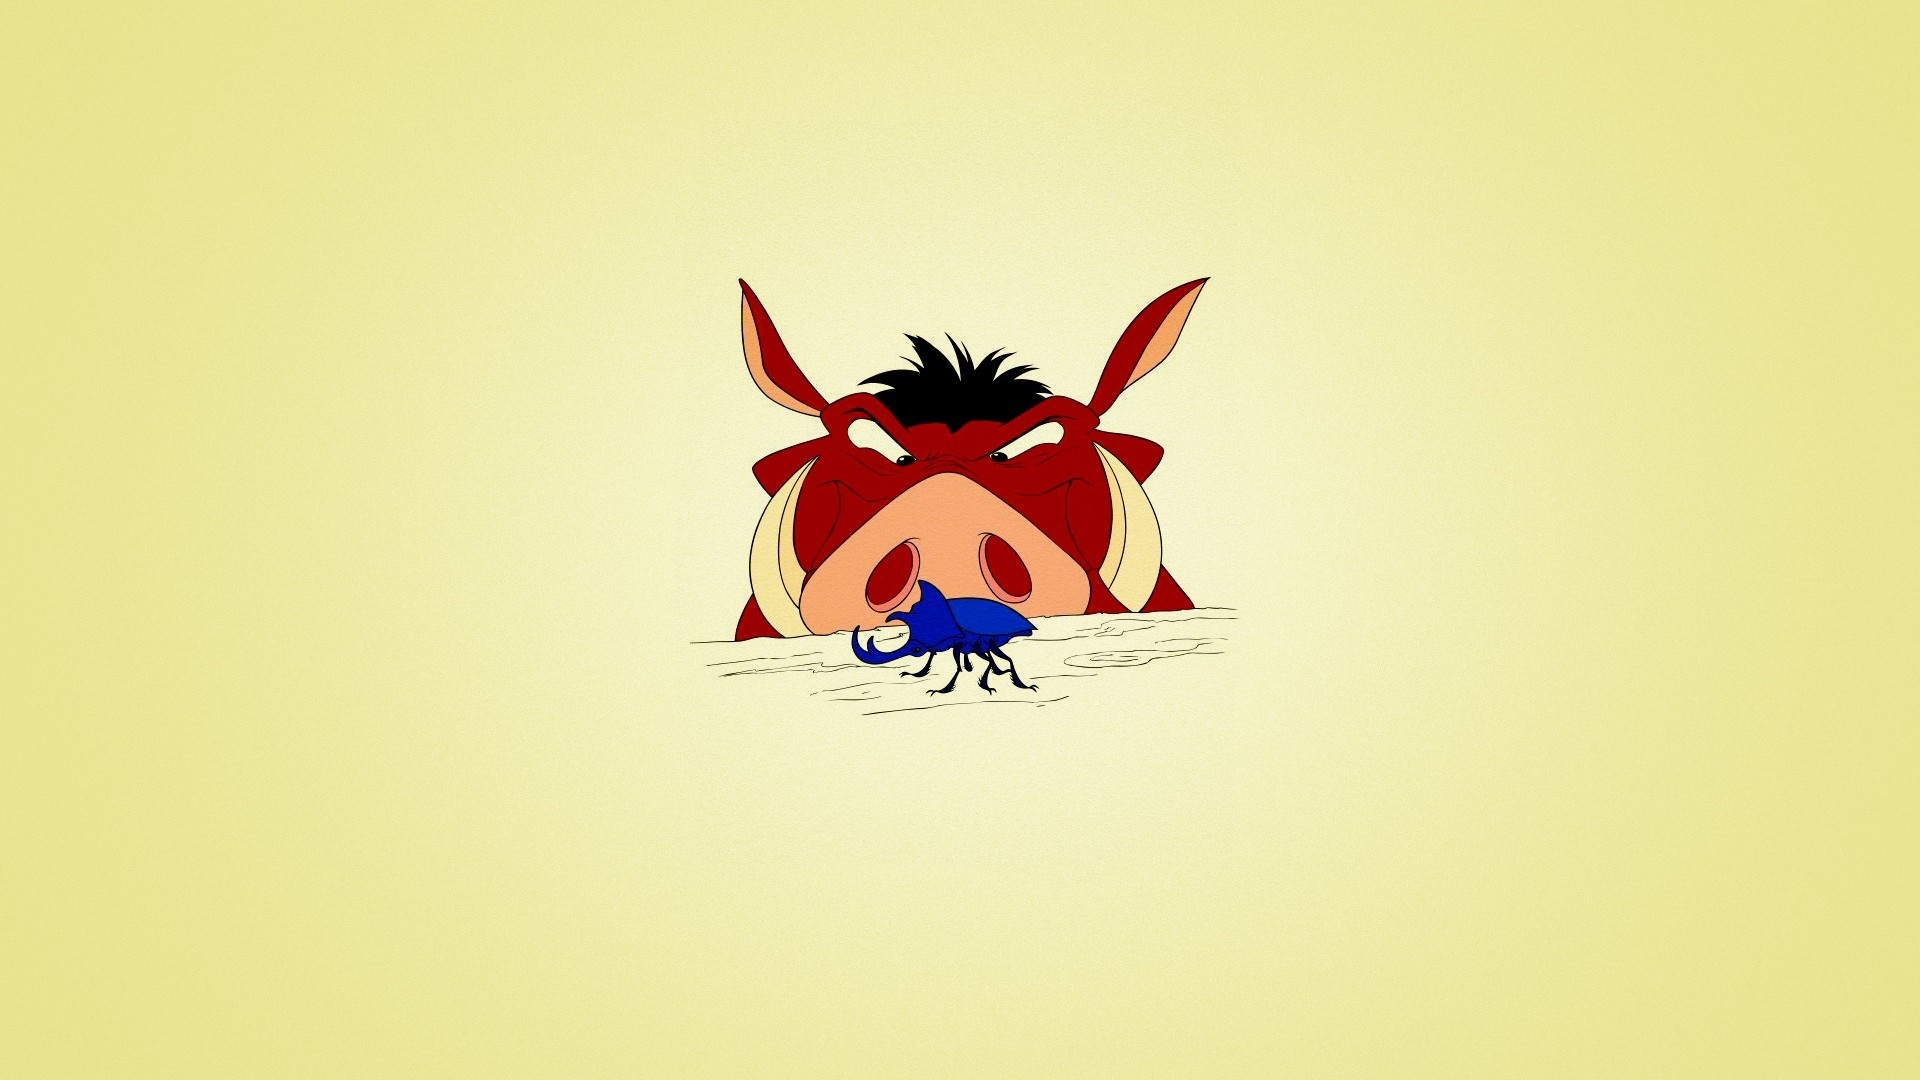 Timon and Pumbaa for 1920 x 1080 HDTV 1080p resolution